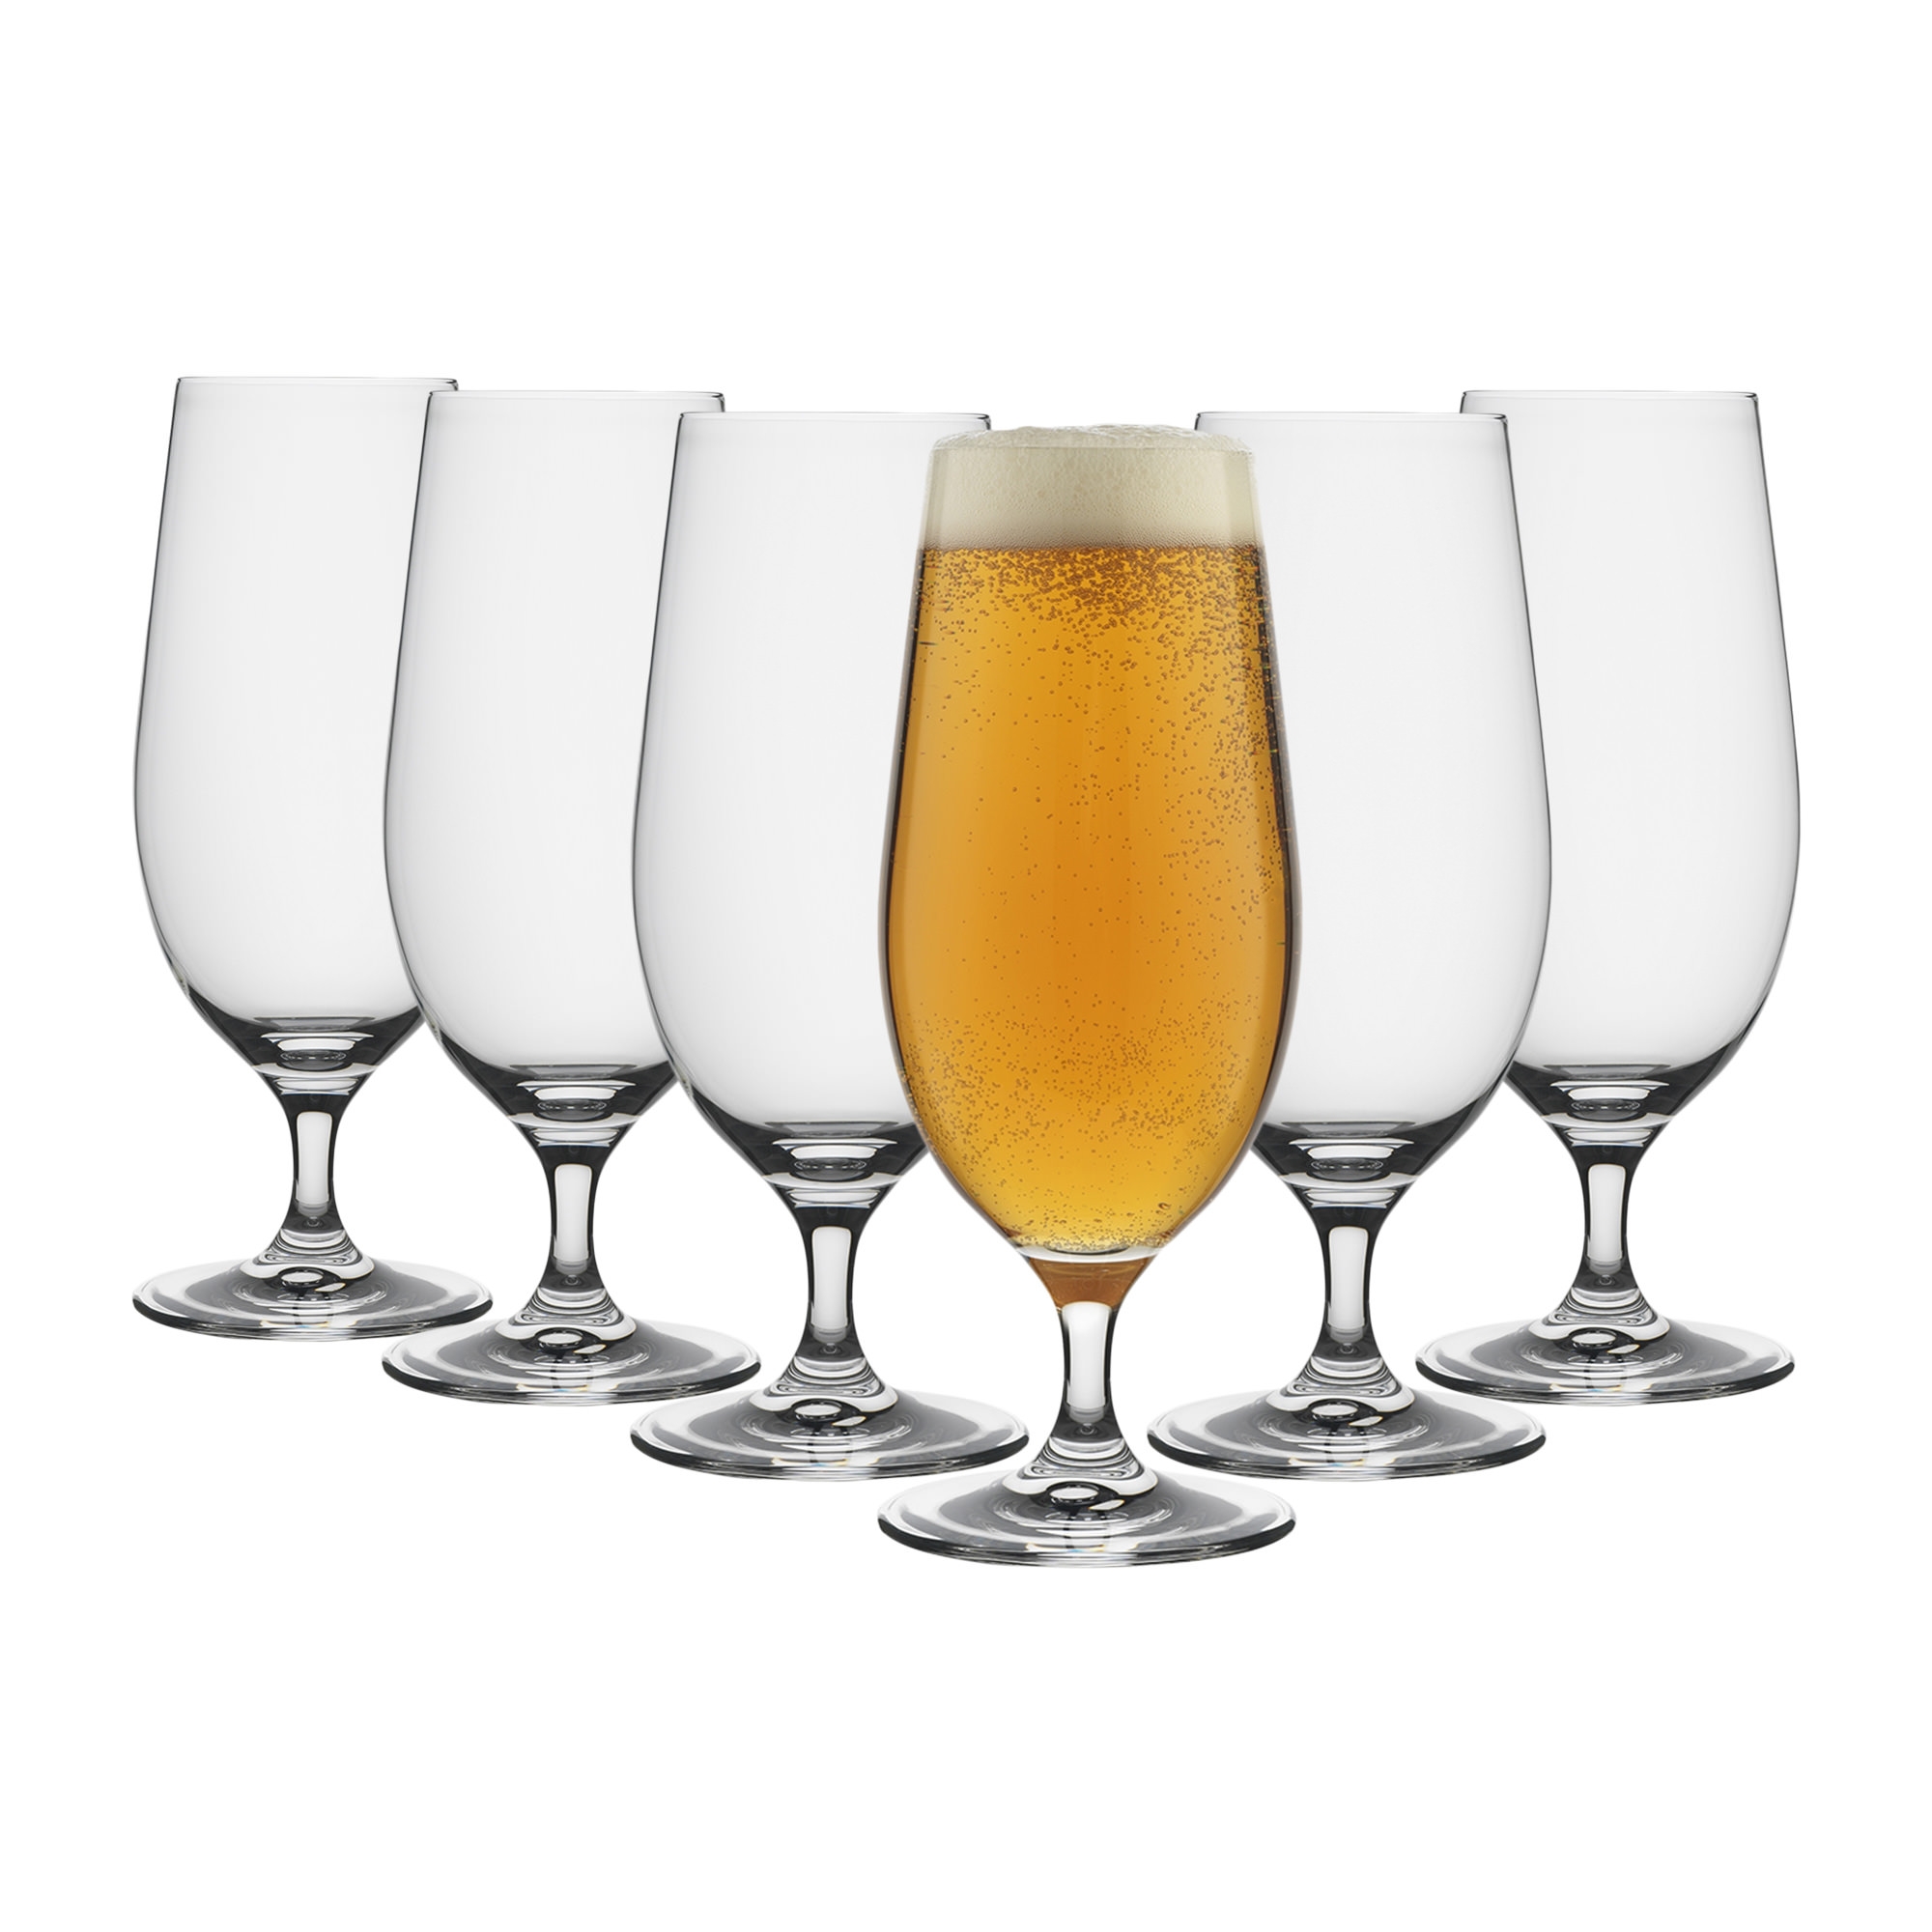 Ecology Classic Stem Beer Glass 460ml Set of 6 Image 2